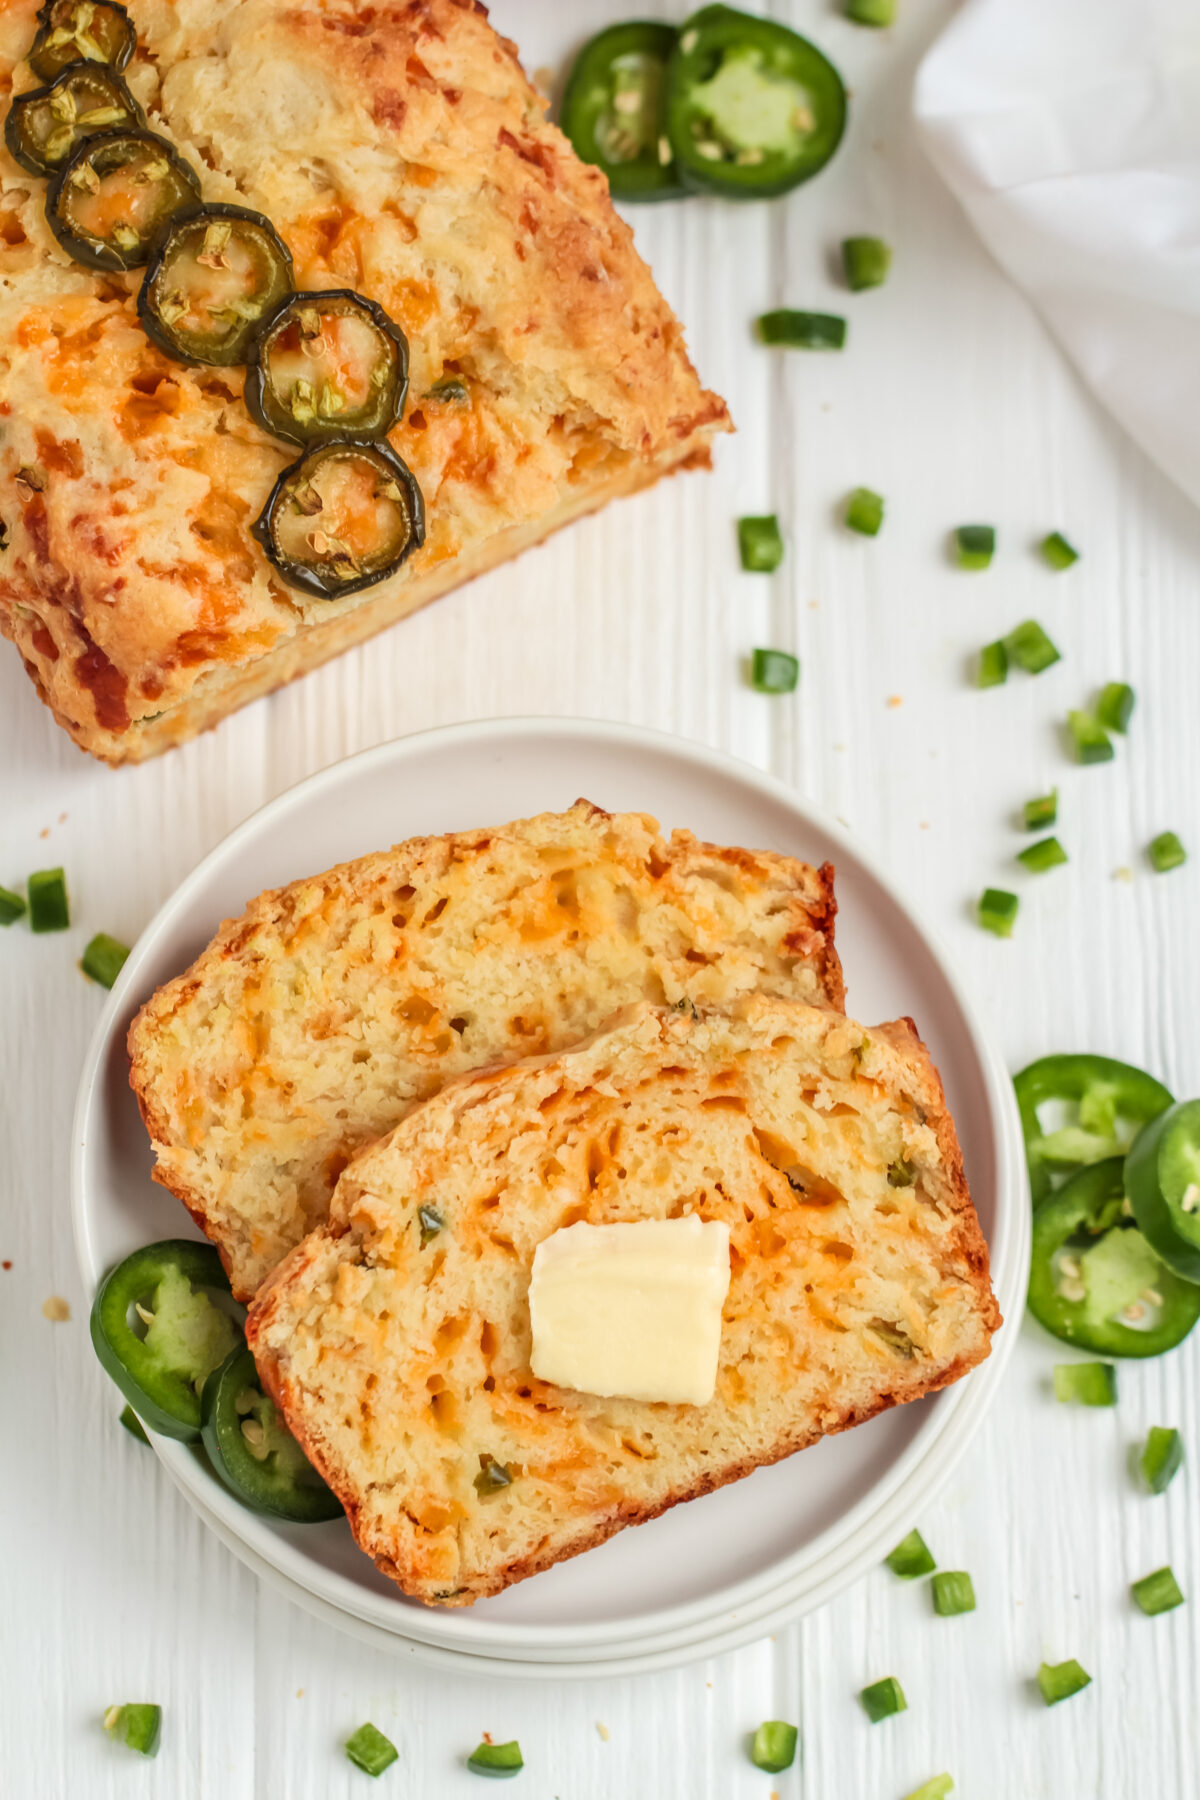 This easy jalapeño cheddar bread recipe is loaded with spice & cheese. It's a great savoury quick bread with a moist, tender crumb.